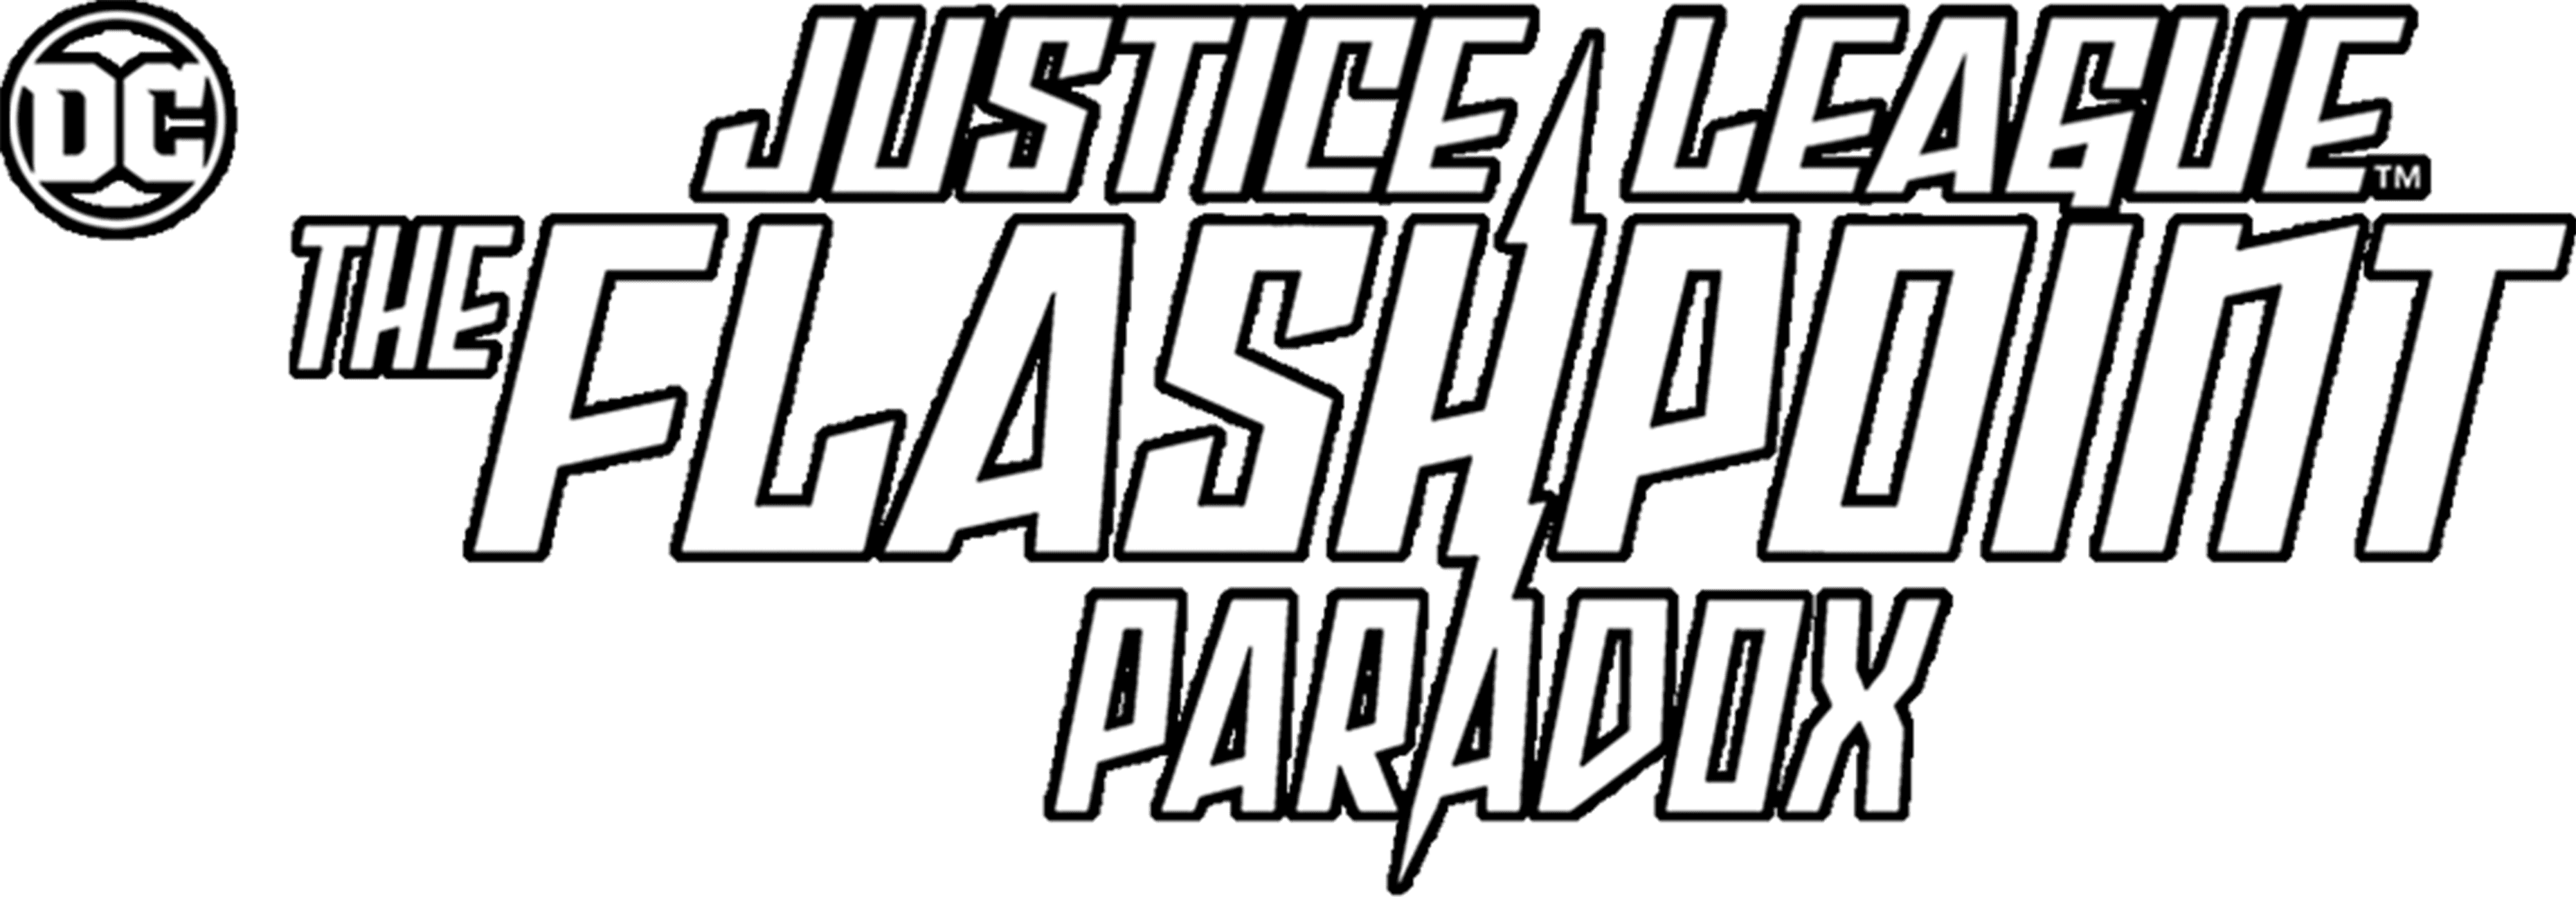 Justice League: The Flashpoint Paradox logo